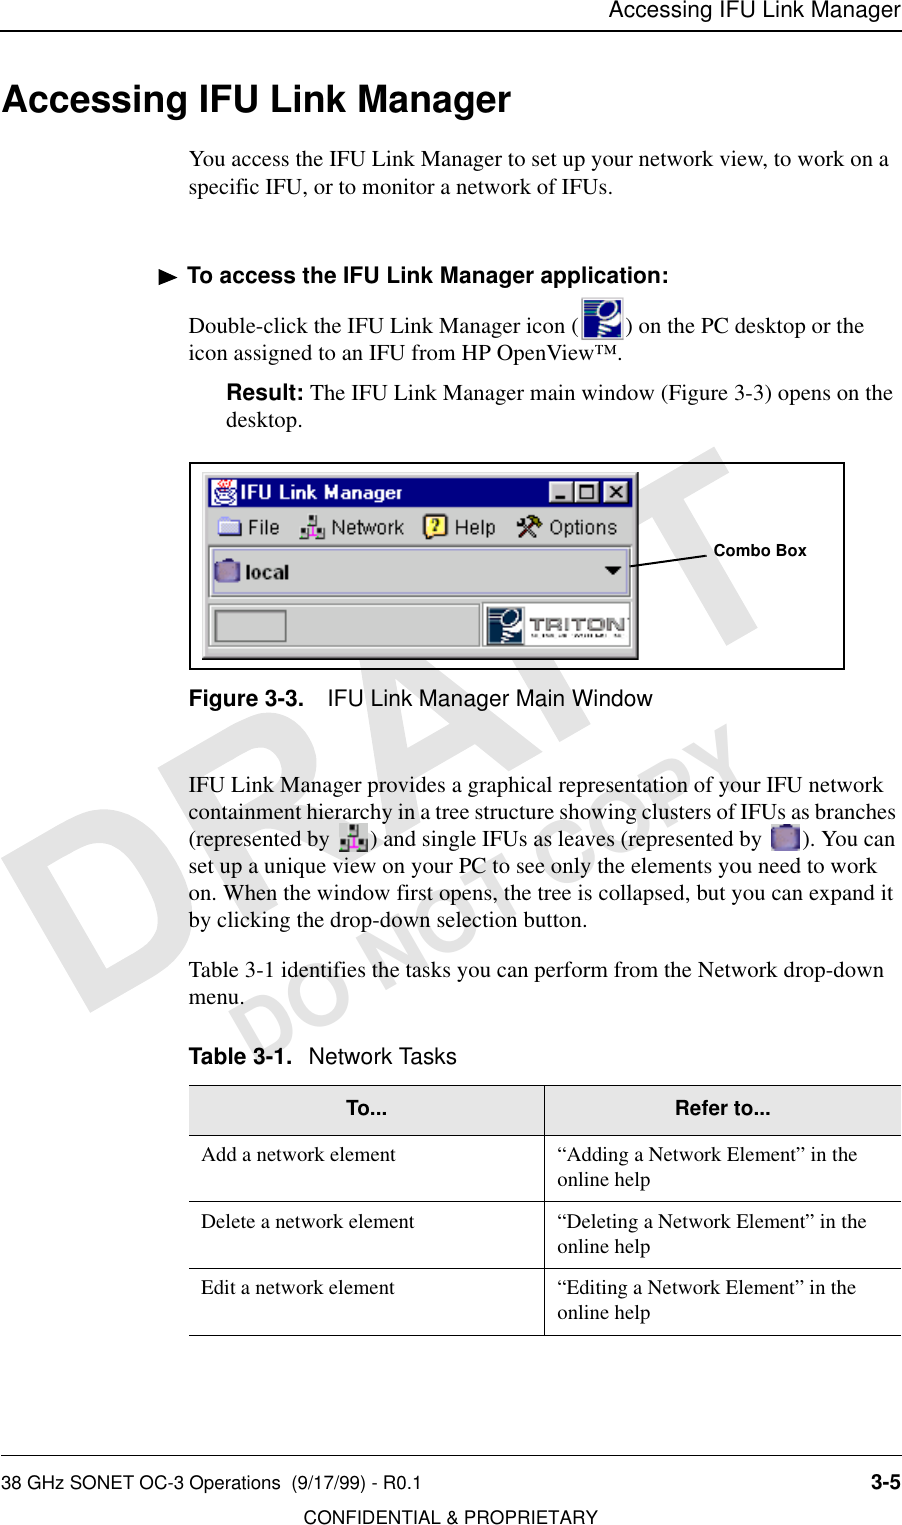 Accessing IFU Link Manager38 GHz SONET OC-3 Operations  (9/17/99) - R0.1 3-5CONFIDENTIAL &amp; PROPRIETARYDO NOT COPYAccessing IFU Link ManagerYou access the IFU Link Manager to set up your network view, to work on a specific IFU, or to monitor a network of IFUs.To access the IFU Link Manager application:Double-click the IFU Link Manager icon ( ) on the PC desktop or the icon assigned to an IFU from HP OpenView™.Result: The IFU Link Manager main window (Figure 3-3) opens on the desktop.Figure 3-3. IFU Link Manager Main WindowIFU Link Manager provides a graphical representation of your IFU network containment hierarchy in a tree structure showing clusters of IFUs as branches (represented by  ) and single IFUs as leaves (represented by  ). You can set up a unique view on your PC to see only the elements you need to work on. When the window first opens, the tree is collapsed, but you can expand it by clicking the drop-down selection button. Table 3-1 identifies the tasks you can perform from the Network drop-down menu.Table 3-1. Network TasksTo... Refer to...Add a network element “Adding a Network Element” in the online helpDelete a network element “Deleting a Network Element” in the online helpEdit a network element “Editing a Network Element” in the online help Combo Box